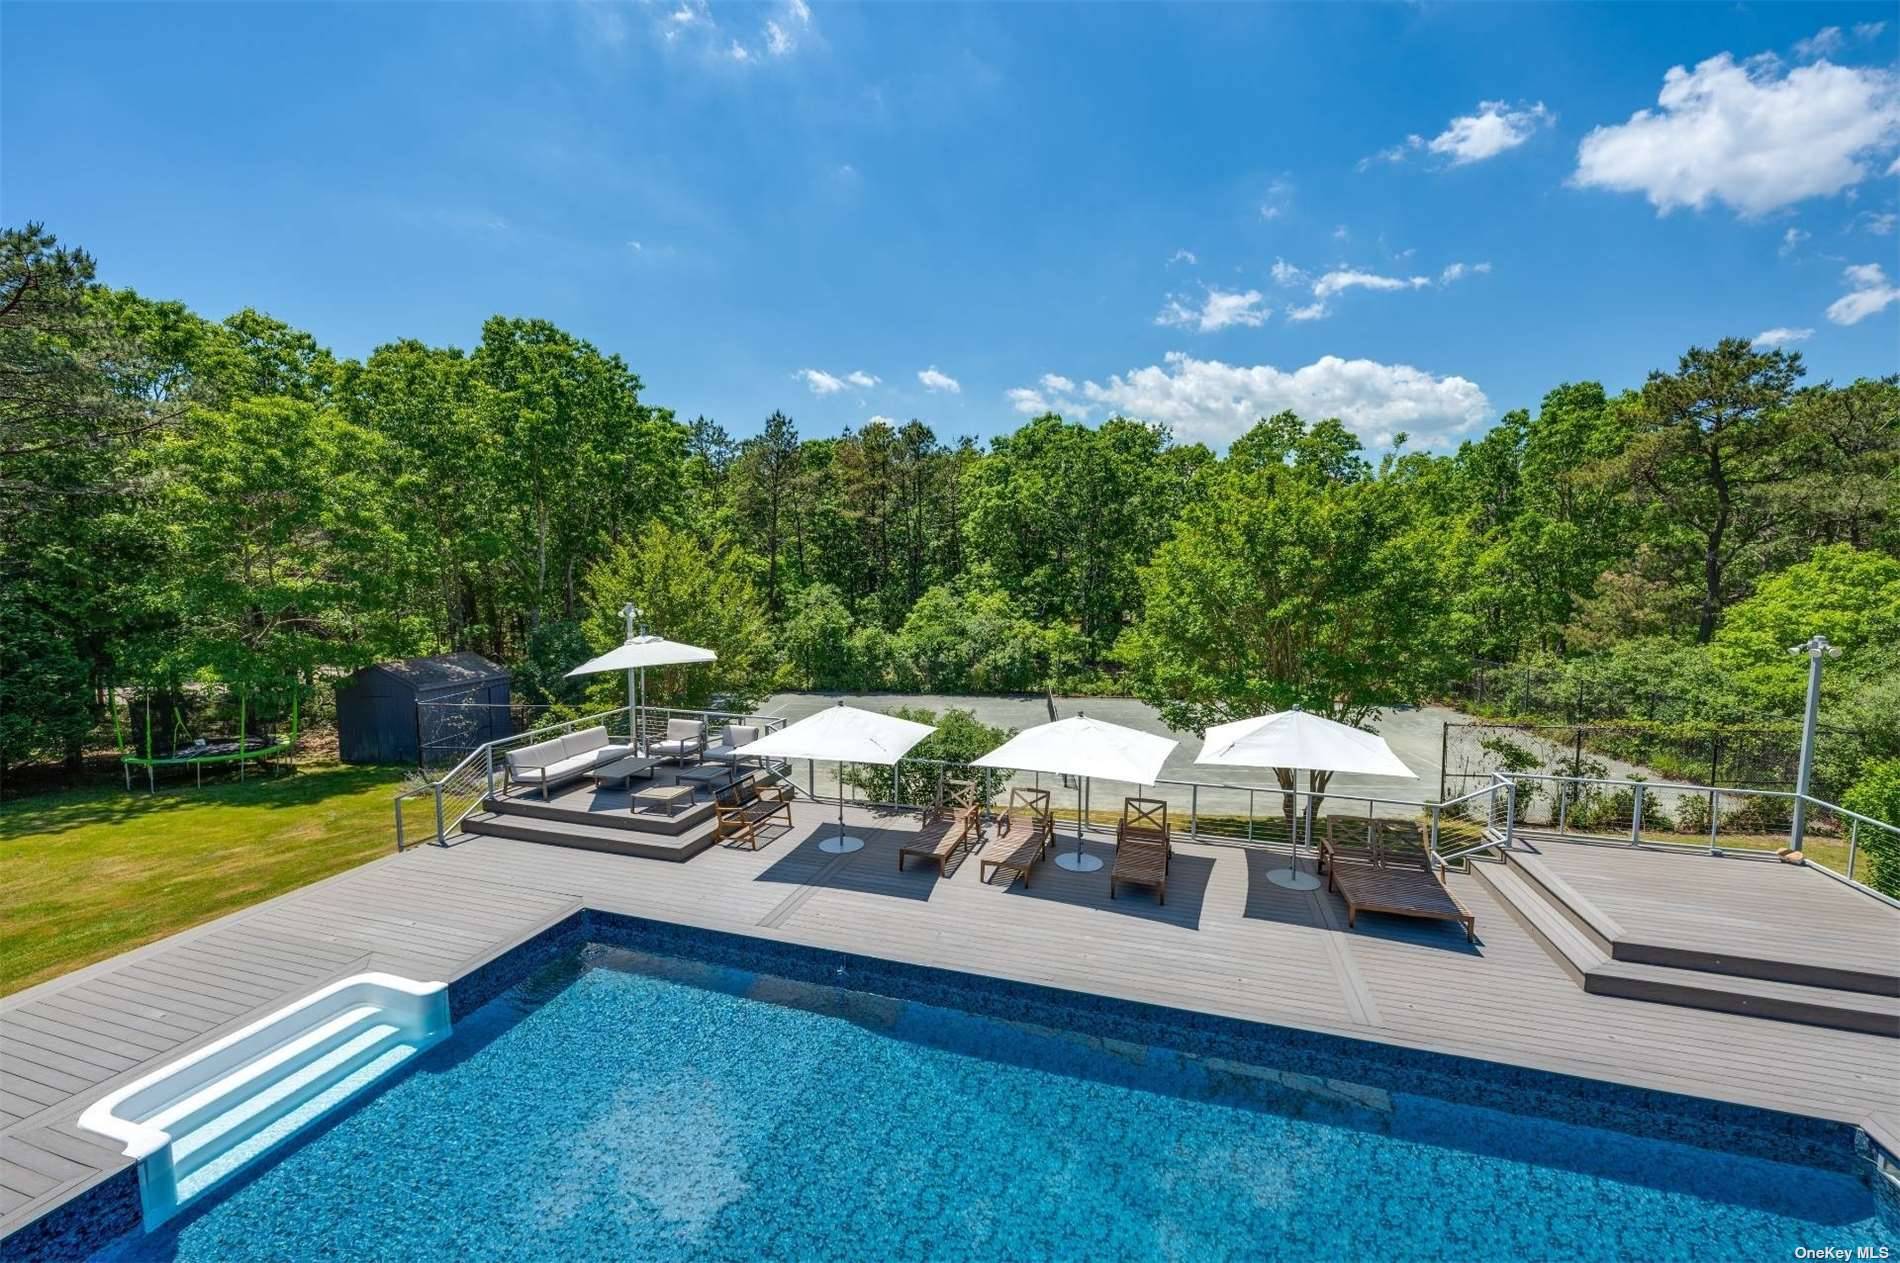 Modern Contemporary with Pool and Tennis On a quiet street in East Quogue sits this ideal getaway with pool and Har tru tennis court.